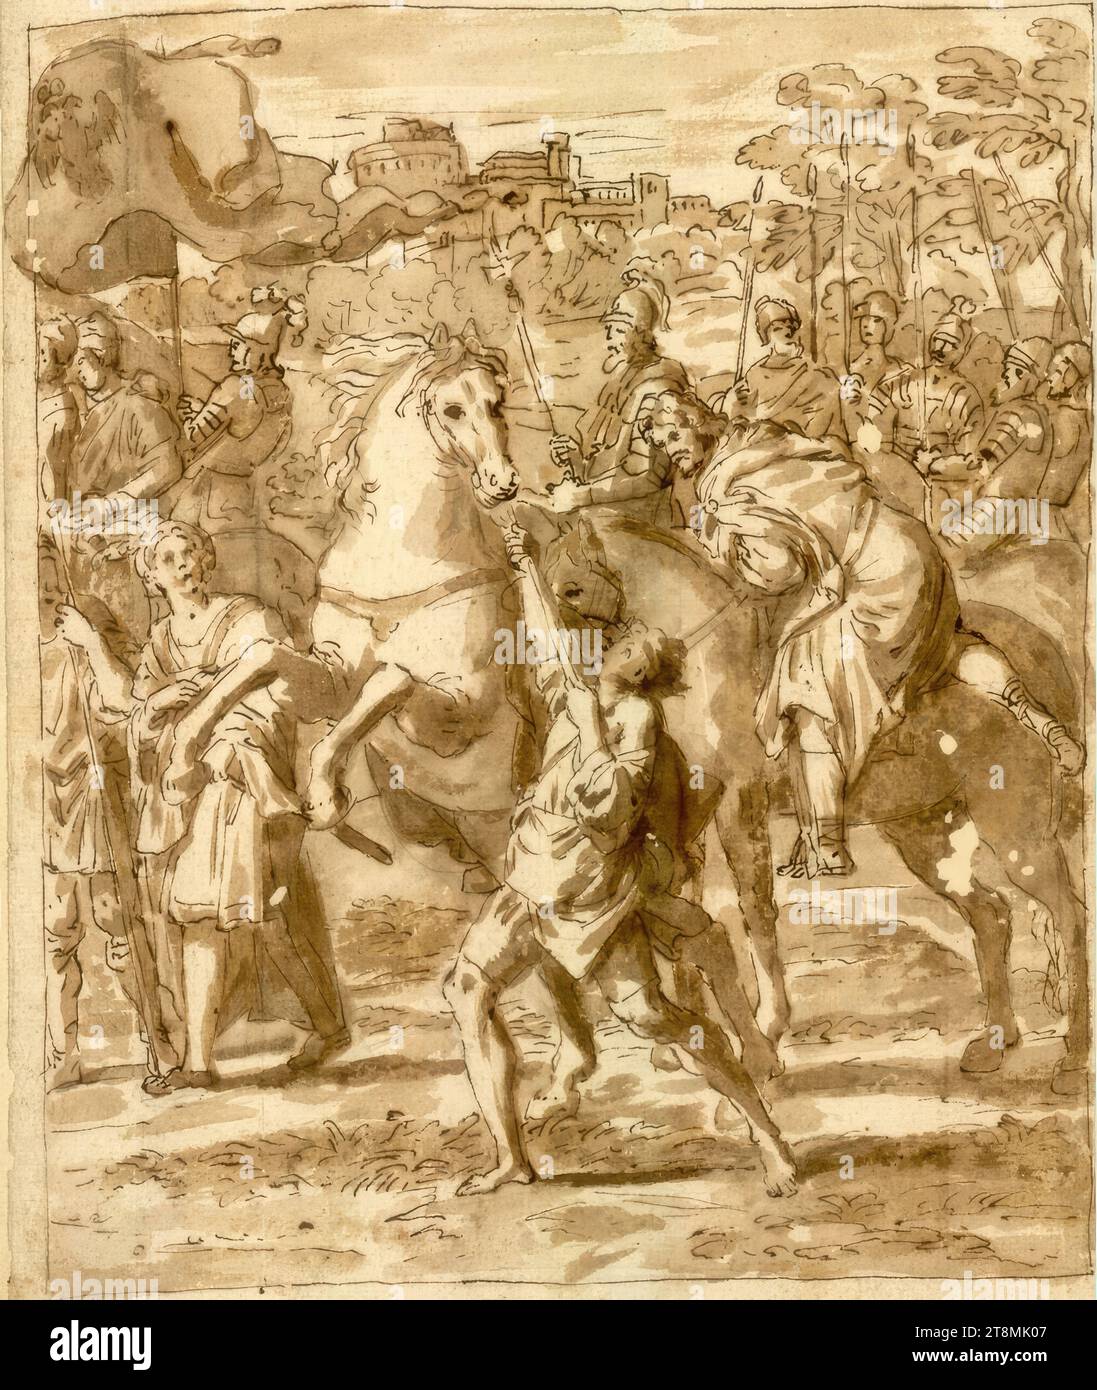 Excerpt (right half) from the 'Meeting of St. Nilus with Emperor Otto III.' after the fresco by Domenichino in the Cappella Farnese of S. Maria in Grottaferrata, Anonymous, after 1610, drawing, pen and brown ink, washed Stock Photo